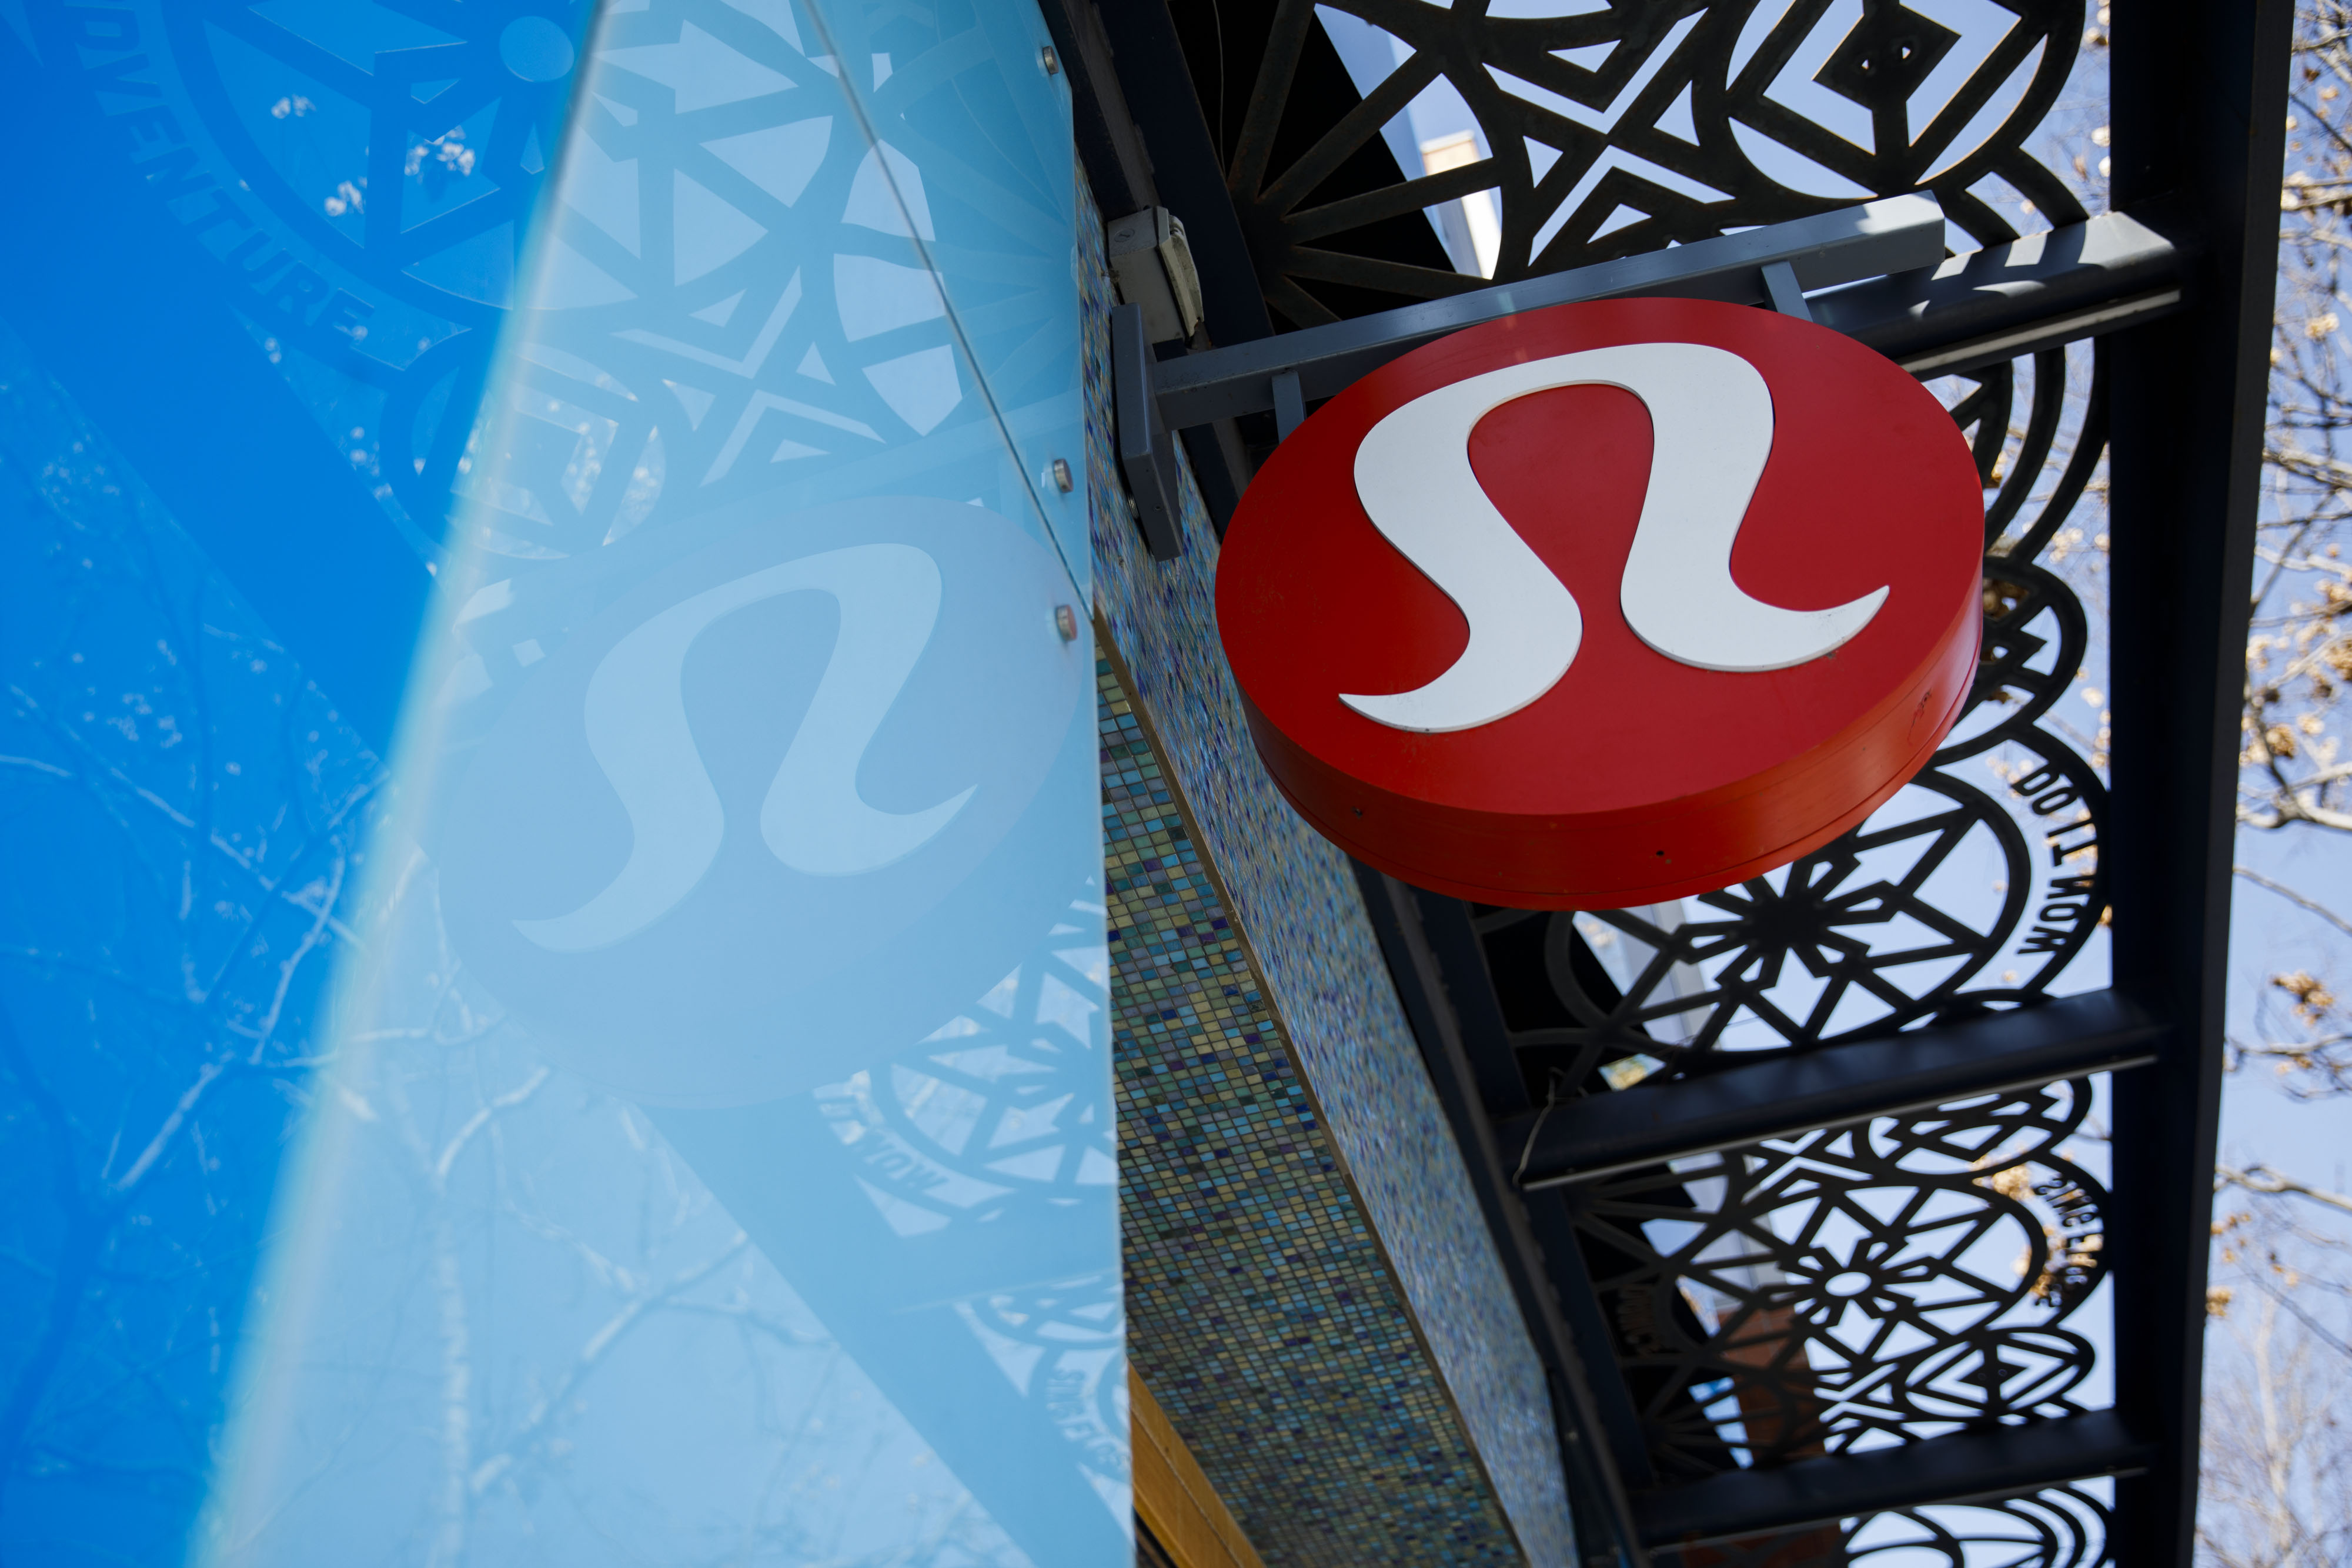 Lululemon Tops Q4 Expectations on Strong Online Sales Growth